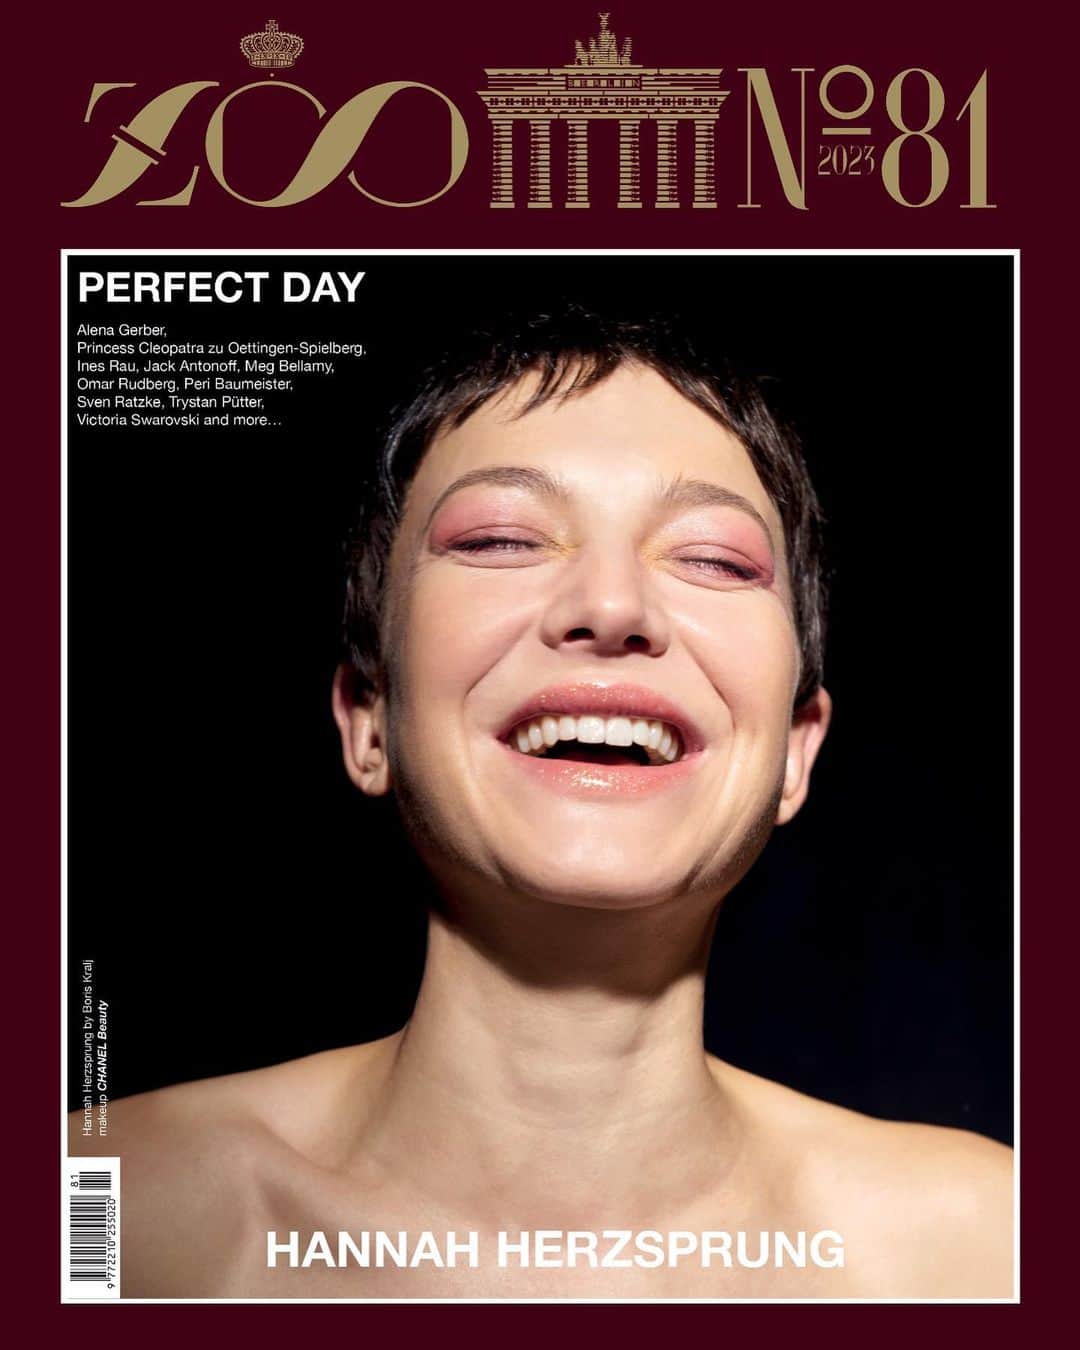 ZOO Magazineのインスタグラム：「ZOO MAGAZINE ISSUE #81: A PERFECT DAY  “I feel delighted to share my Cover story for @zoomagazine with @chanelbeauty.  It was a pleasure to look back at my preparation process for Four Minutes, and chat about how Jenny has matured and evolved in the upcoming story’s sequel 15 Years (2024).”  shot and interviewed exclusively for ZOO MAGAZINE 81 - ZOO MAGAZINE 20 YEARS  Photographer: Boris Kralj @boriskralj Stylist: Saskia Jung @saskiajung_  Hair and Make-up: Philipp Verheyen @philipverheyen using @chanel.beauty  Photographer’s Assistant: Frederick Hermann   Full look: @chanelofficial Make-up: @chanel.beauty  #ZooMagazine #20YEARSZOOMAGAZINE #CHANEL #CHANELBeauty」